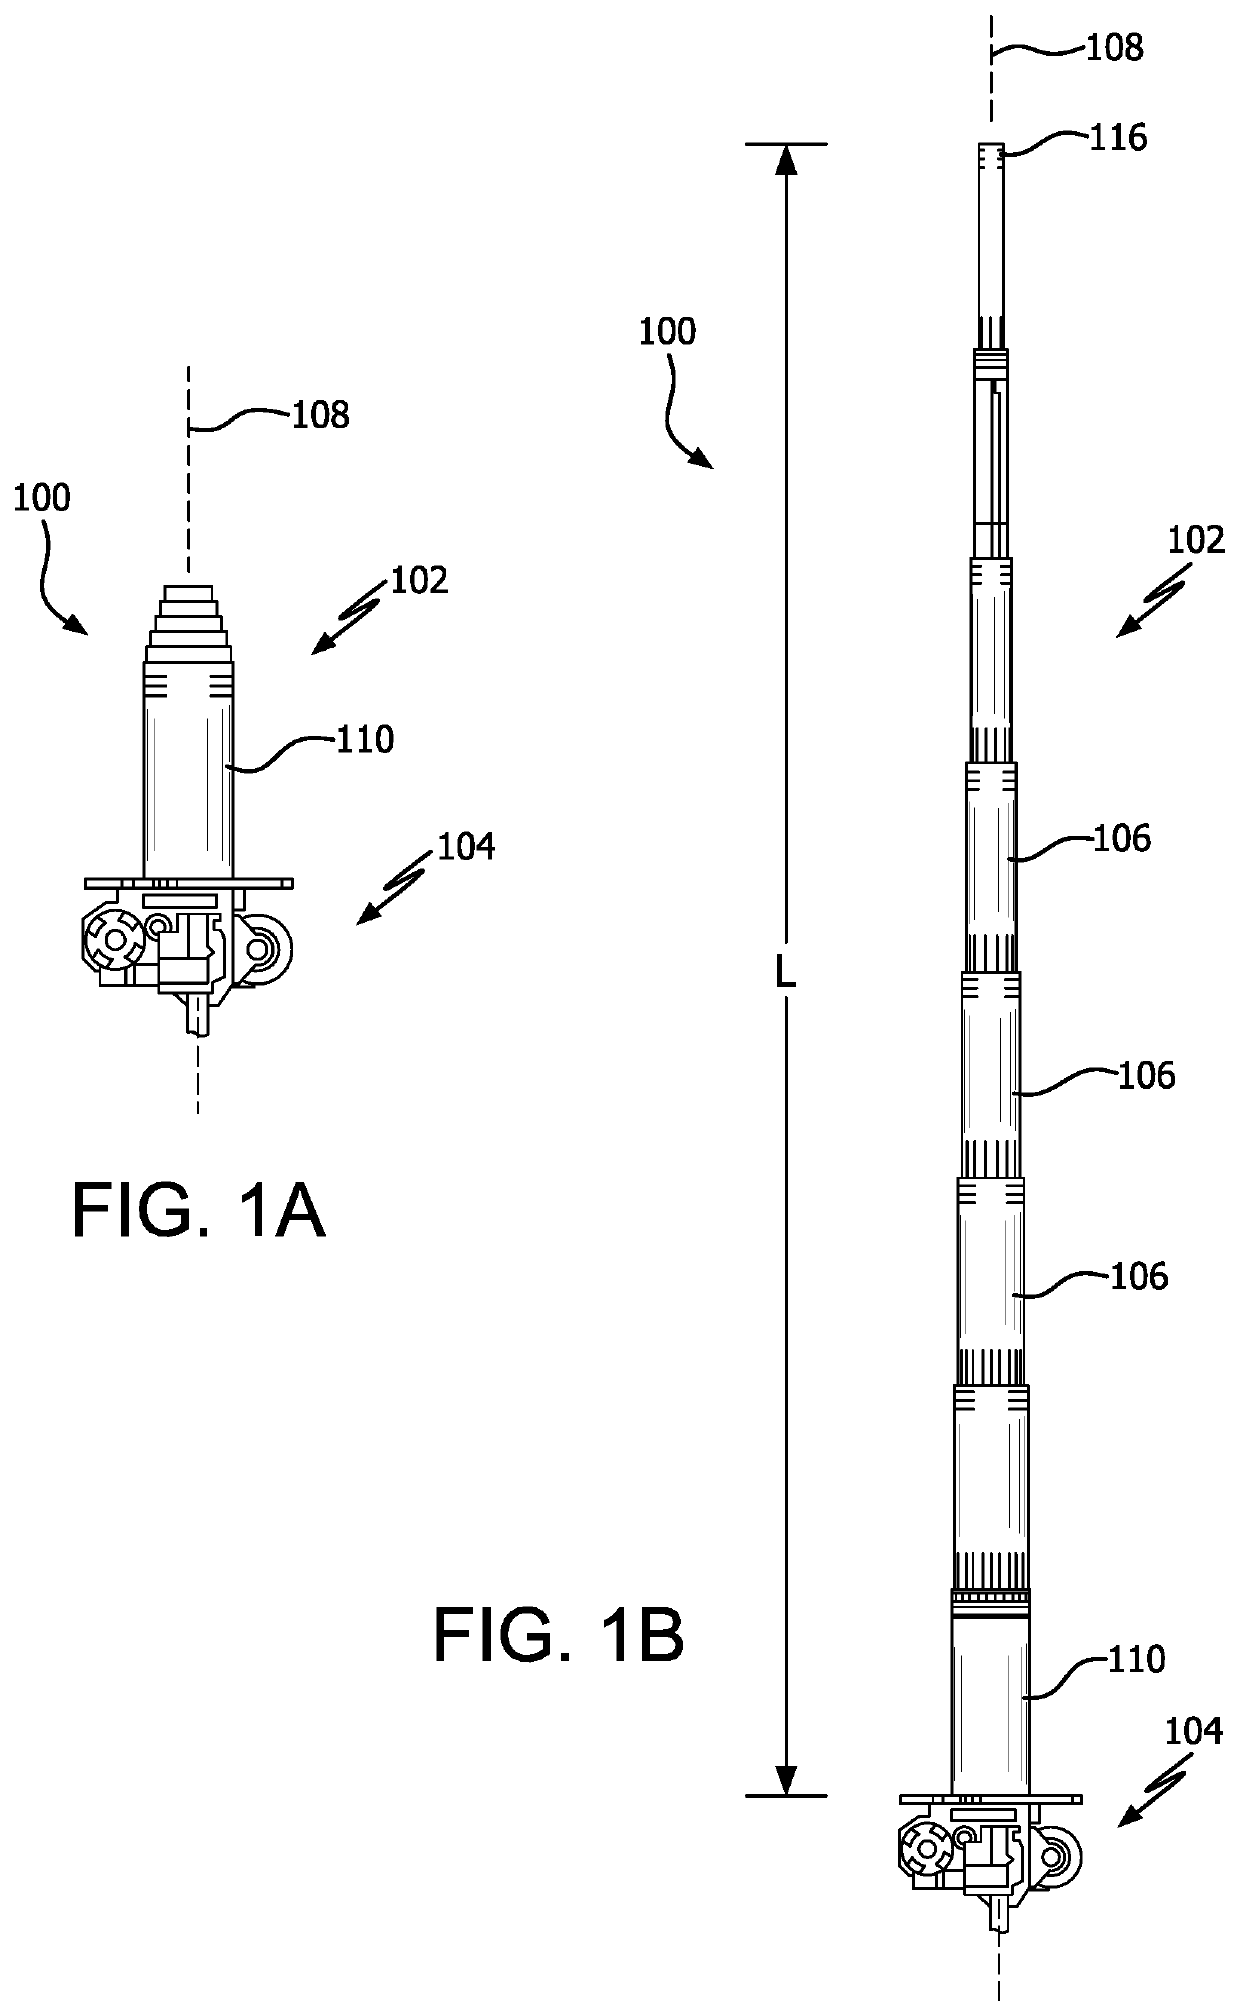 Extensible telescoping mast assembly and deployment mechanism